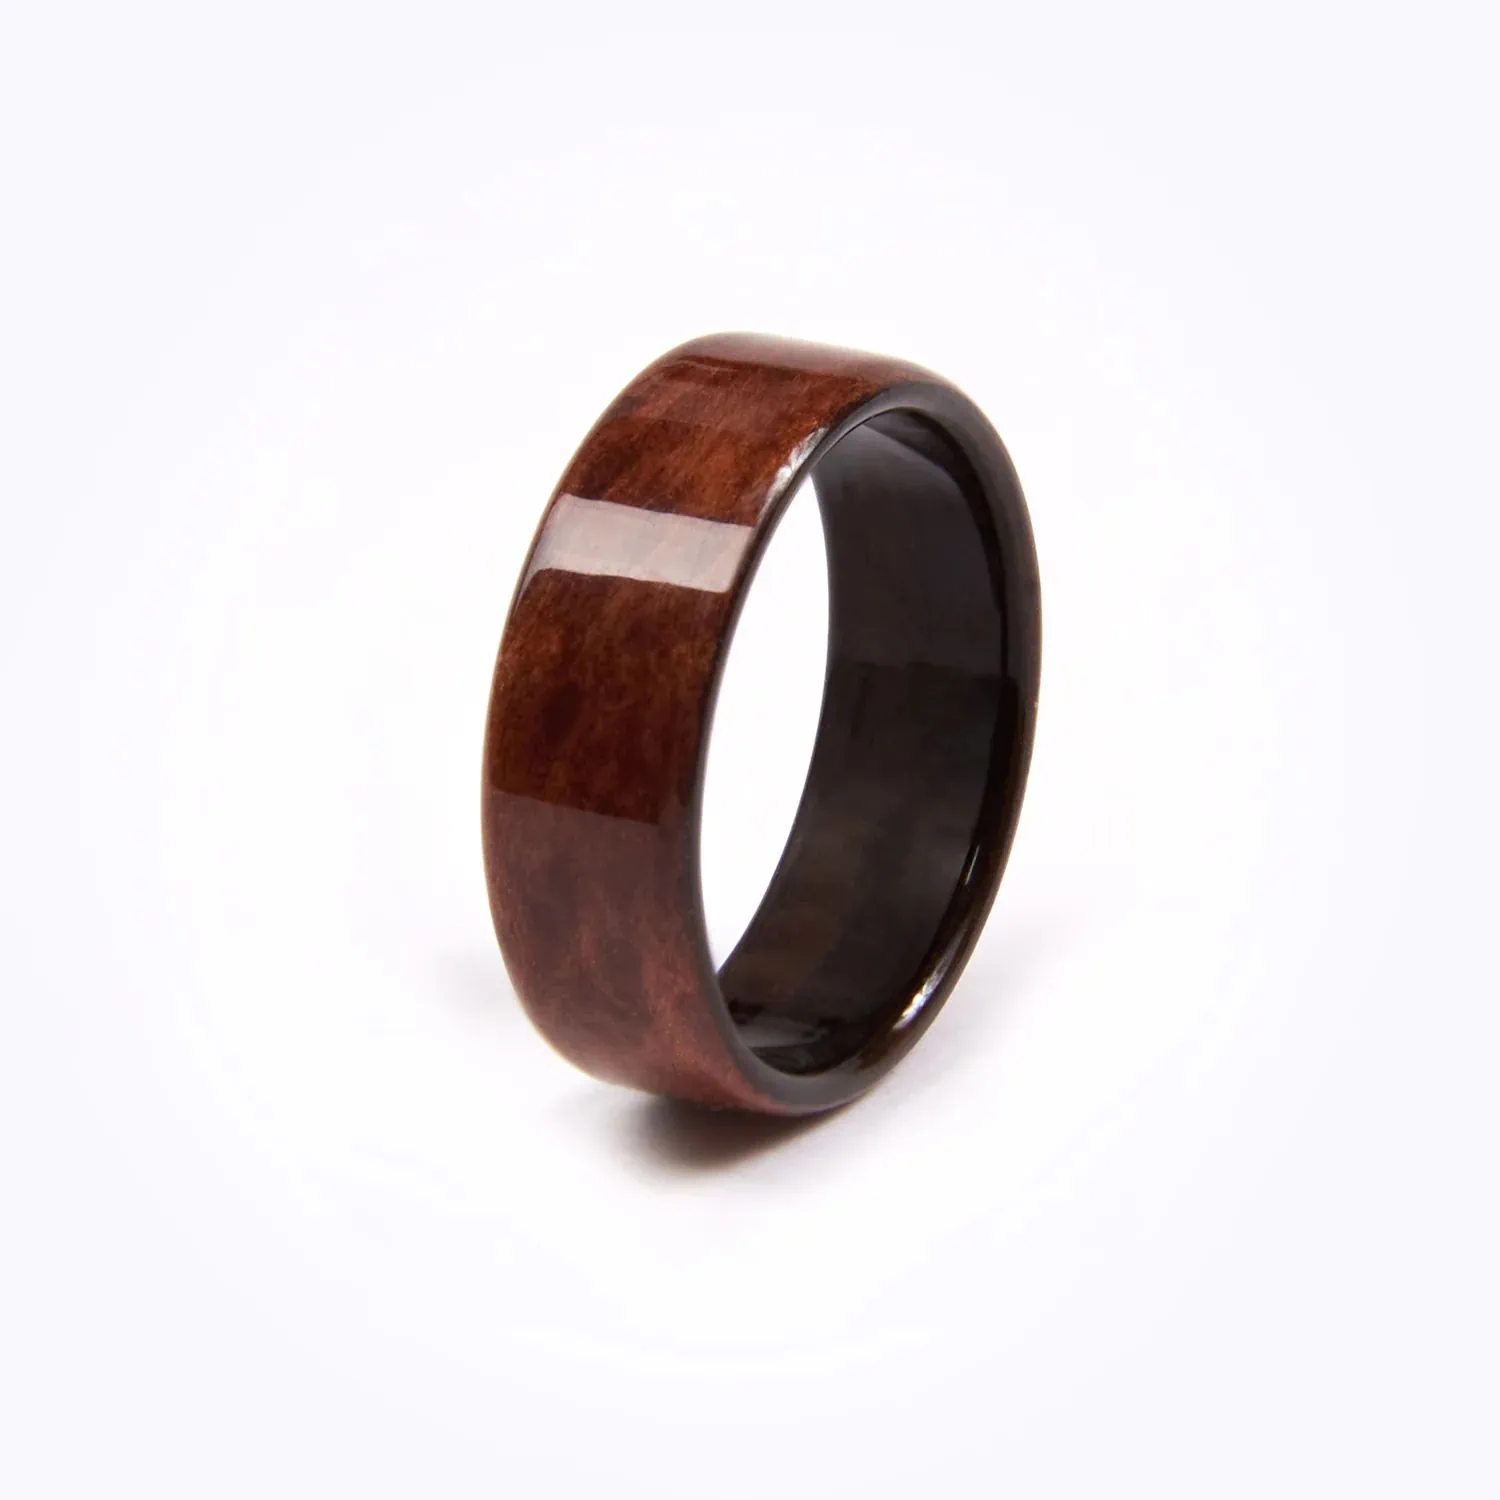 CNICK Redwood blank1 - CNICK Tesla Smart NFC Ring Review – Contactless payments & Tesla unlocking via a ring